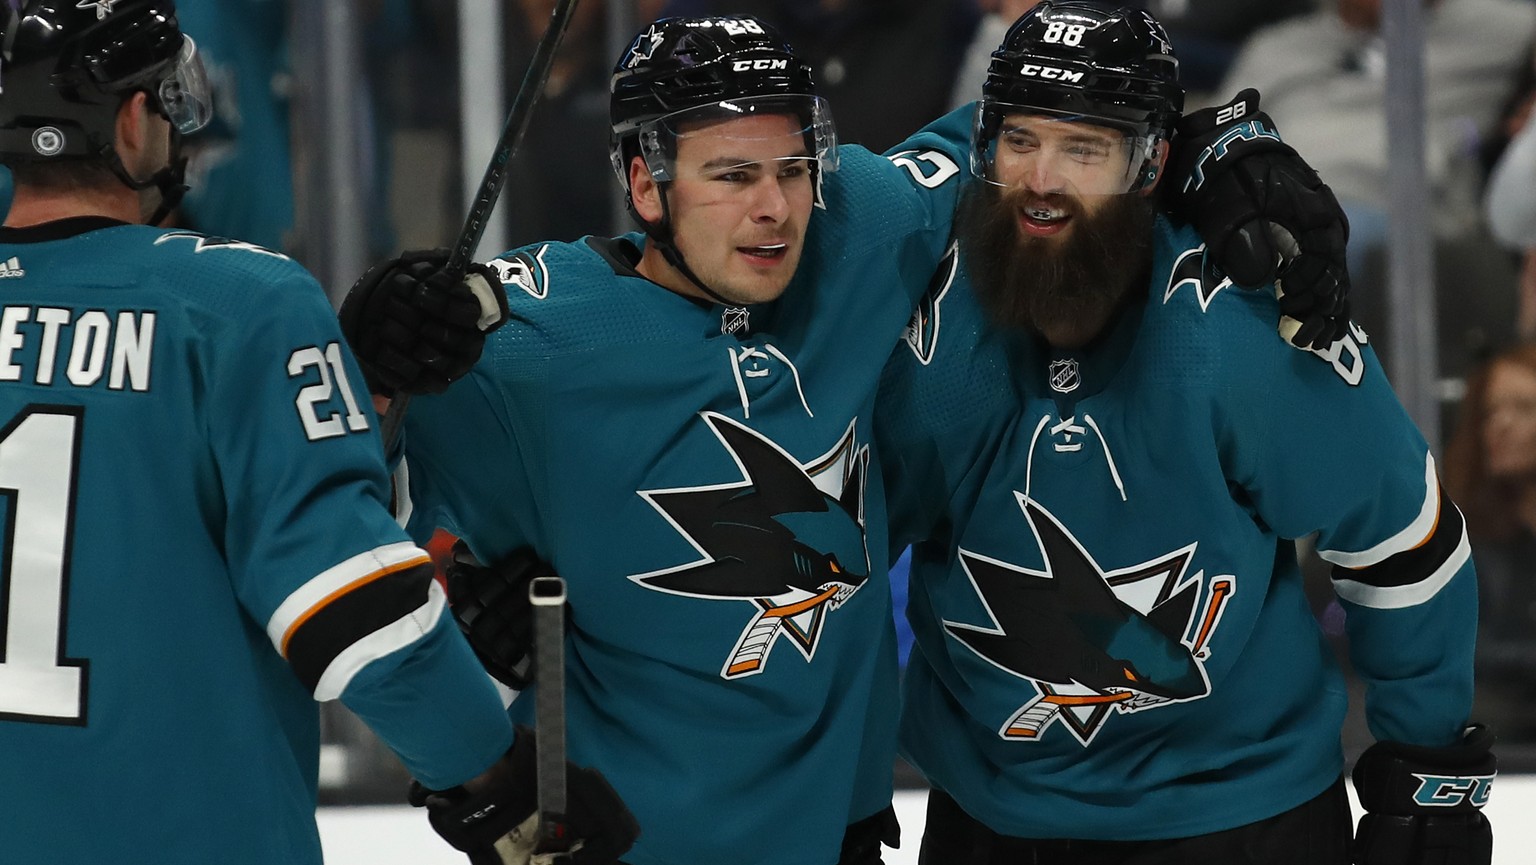 San Jose Sharks right wing Timo Meier (28) celebrates goal with defenseman Brent Burns (88) during the first period of an NHL hockey game against the Los Angeles Kings in San Jose, Calif., Saturday, M ...